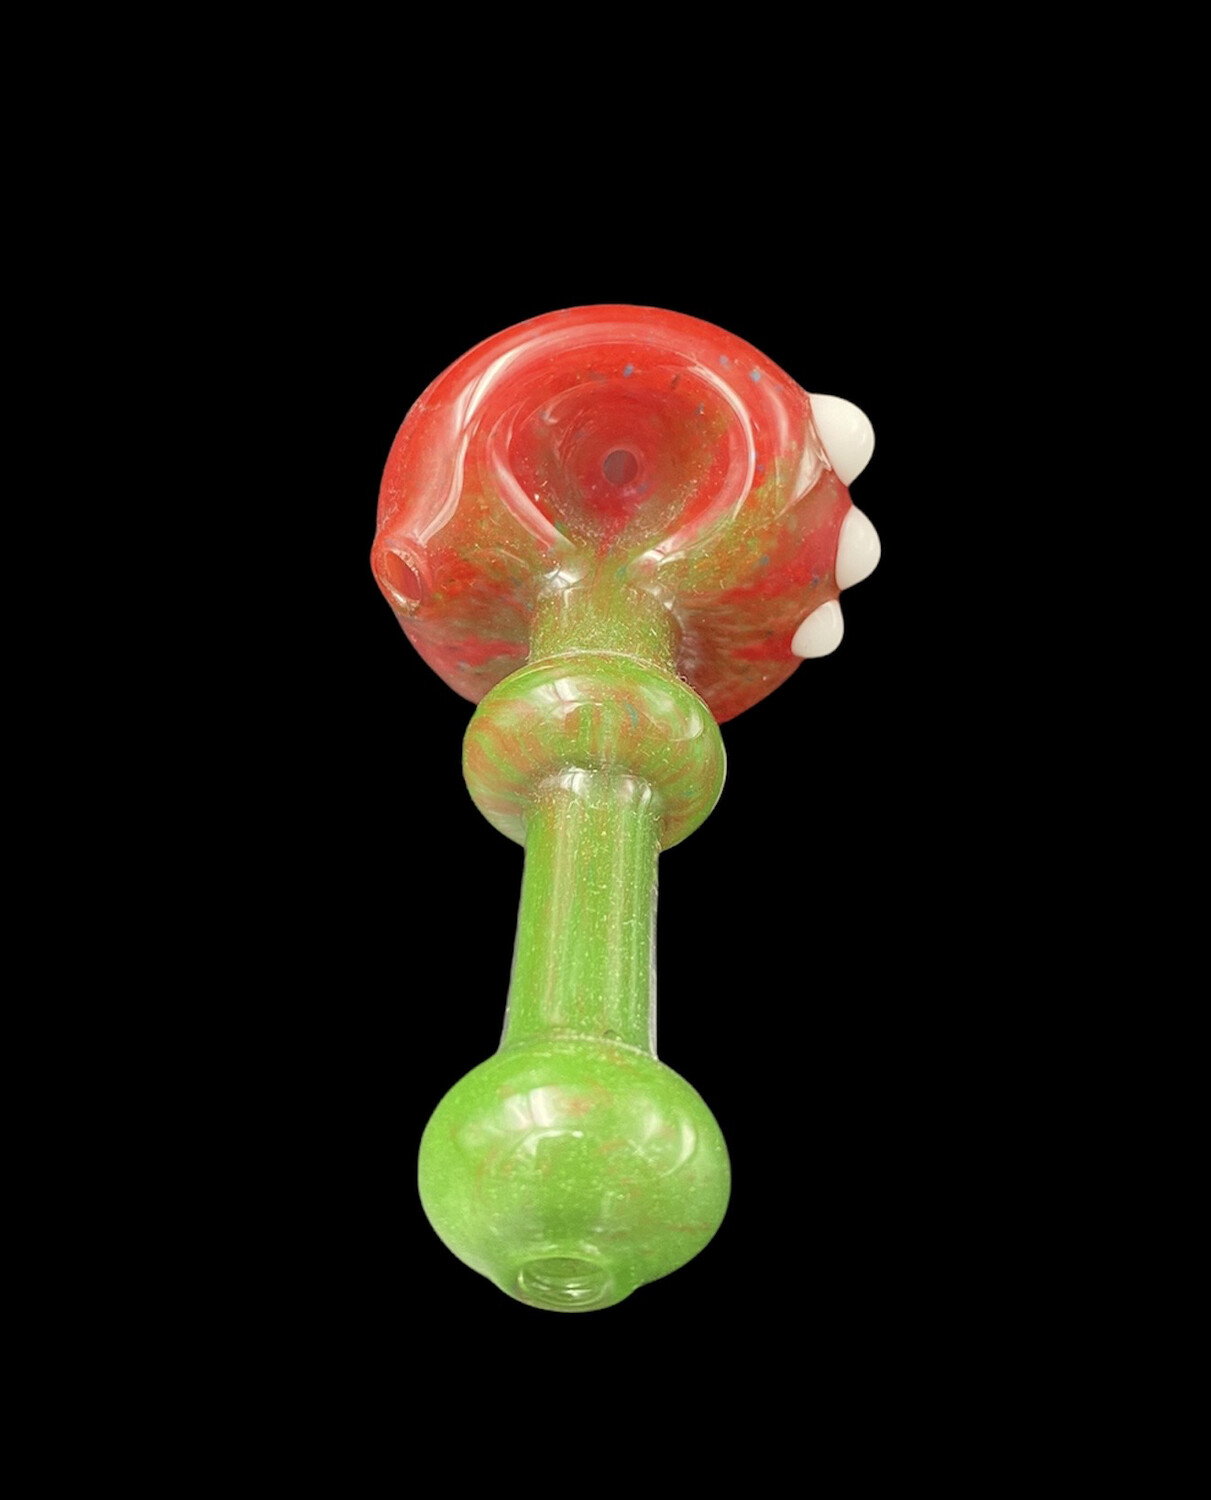 Goblin King (TX) Frit Spoon - Green to Red